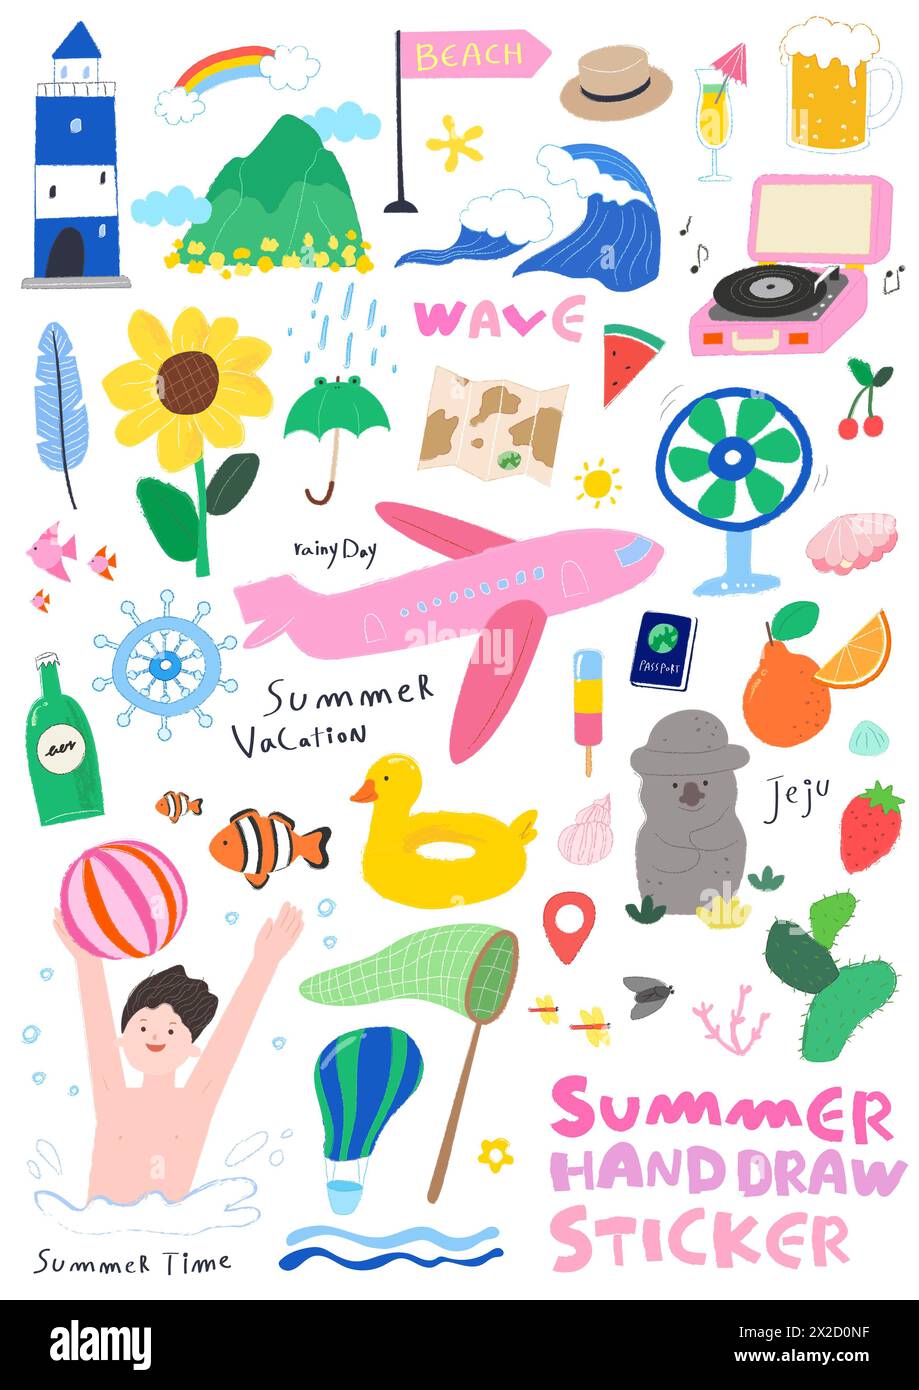 Various summer objects and person stickers Stock Photo